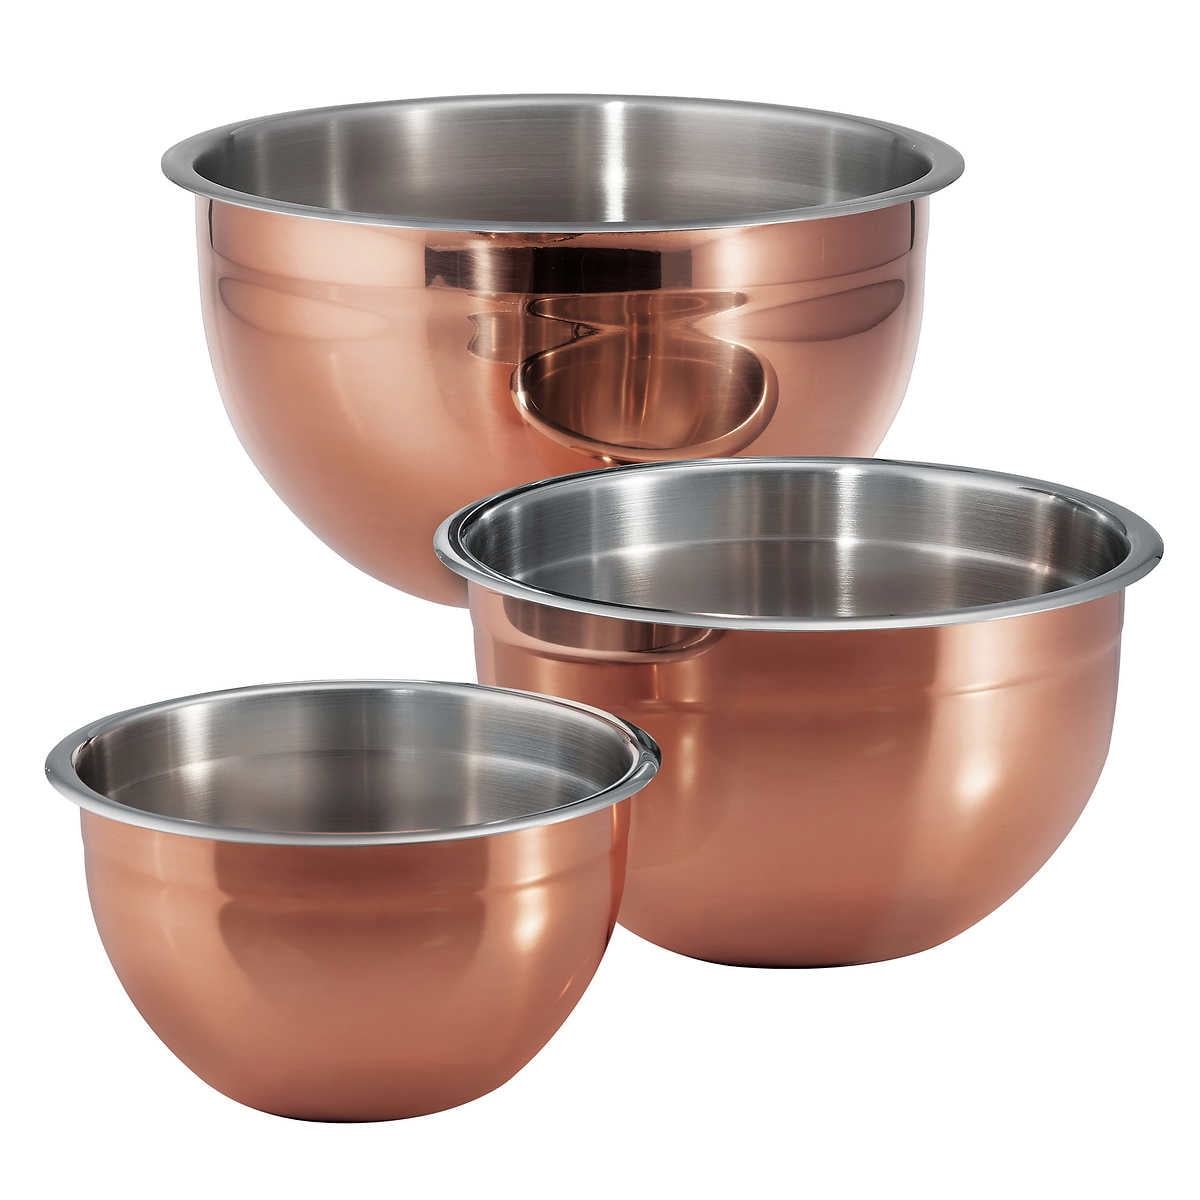 3 Beautiful Steel Lined Copper Bowls